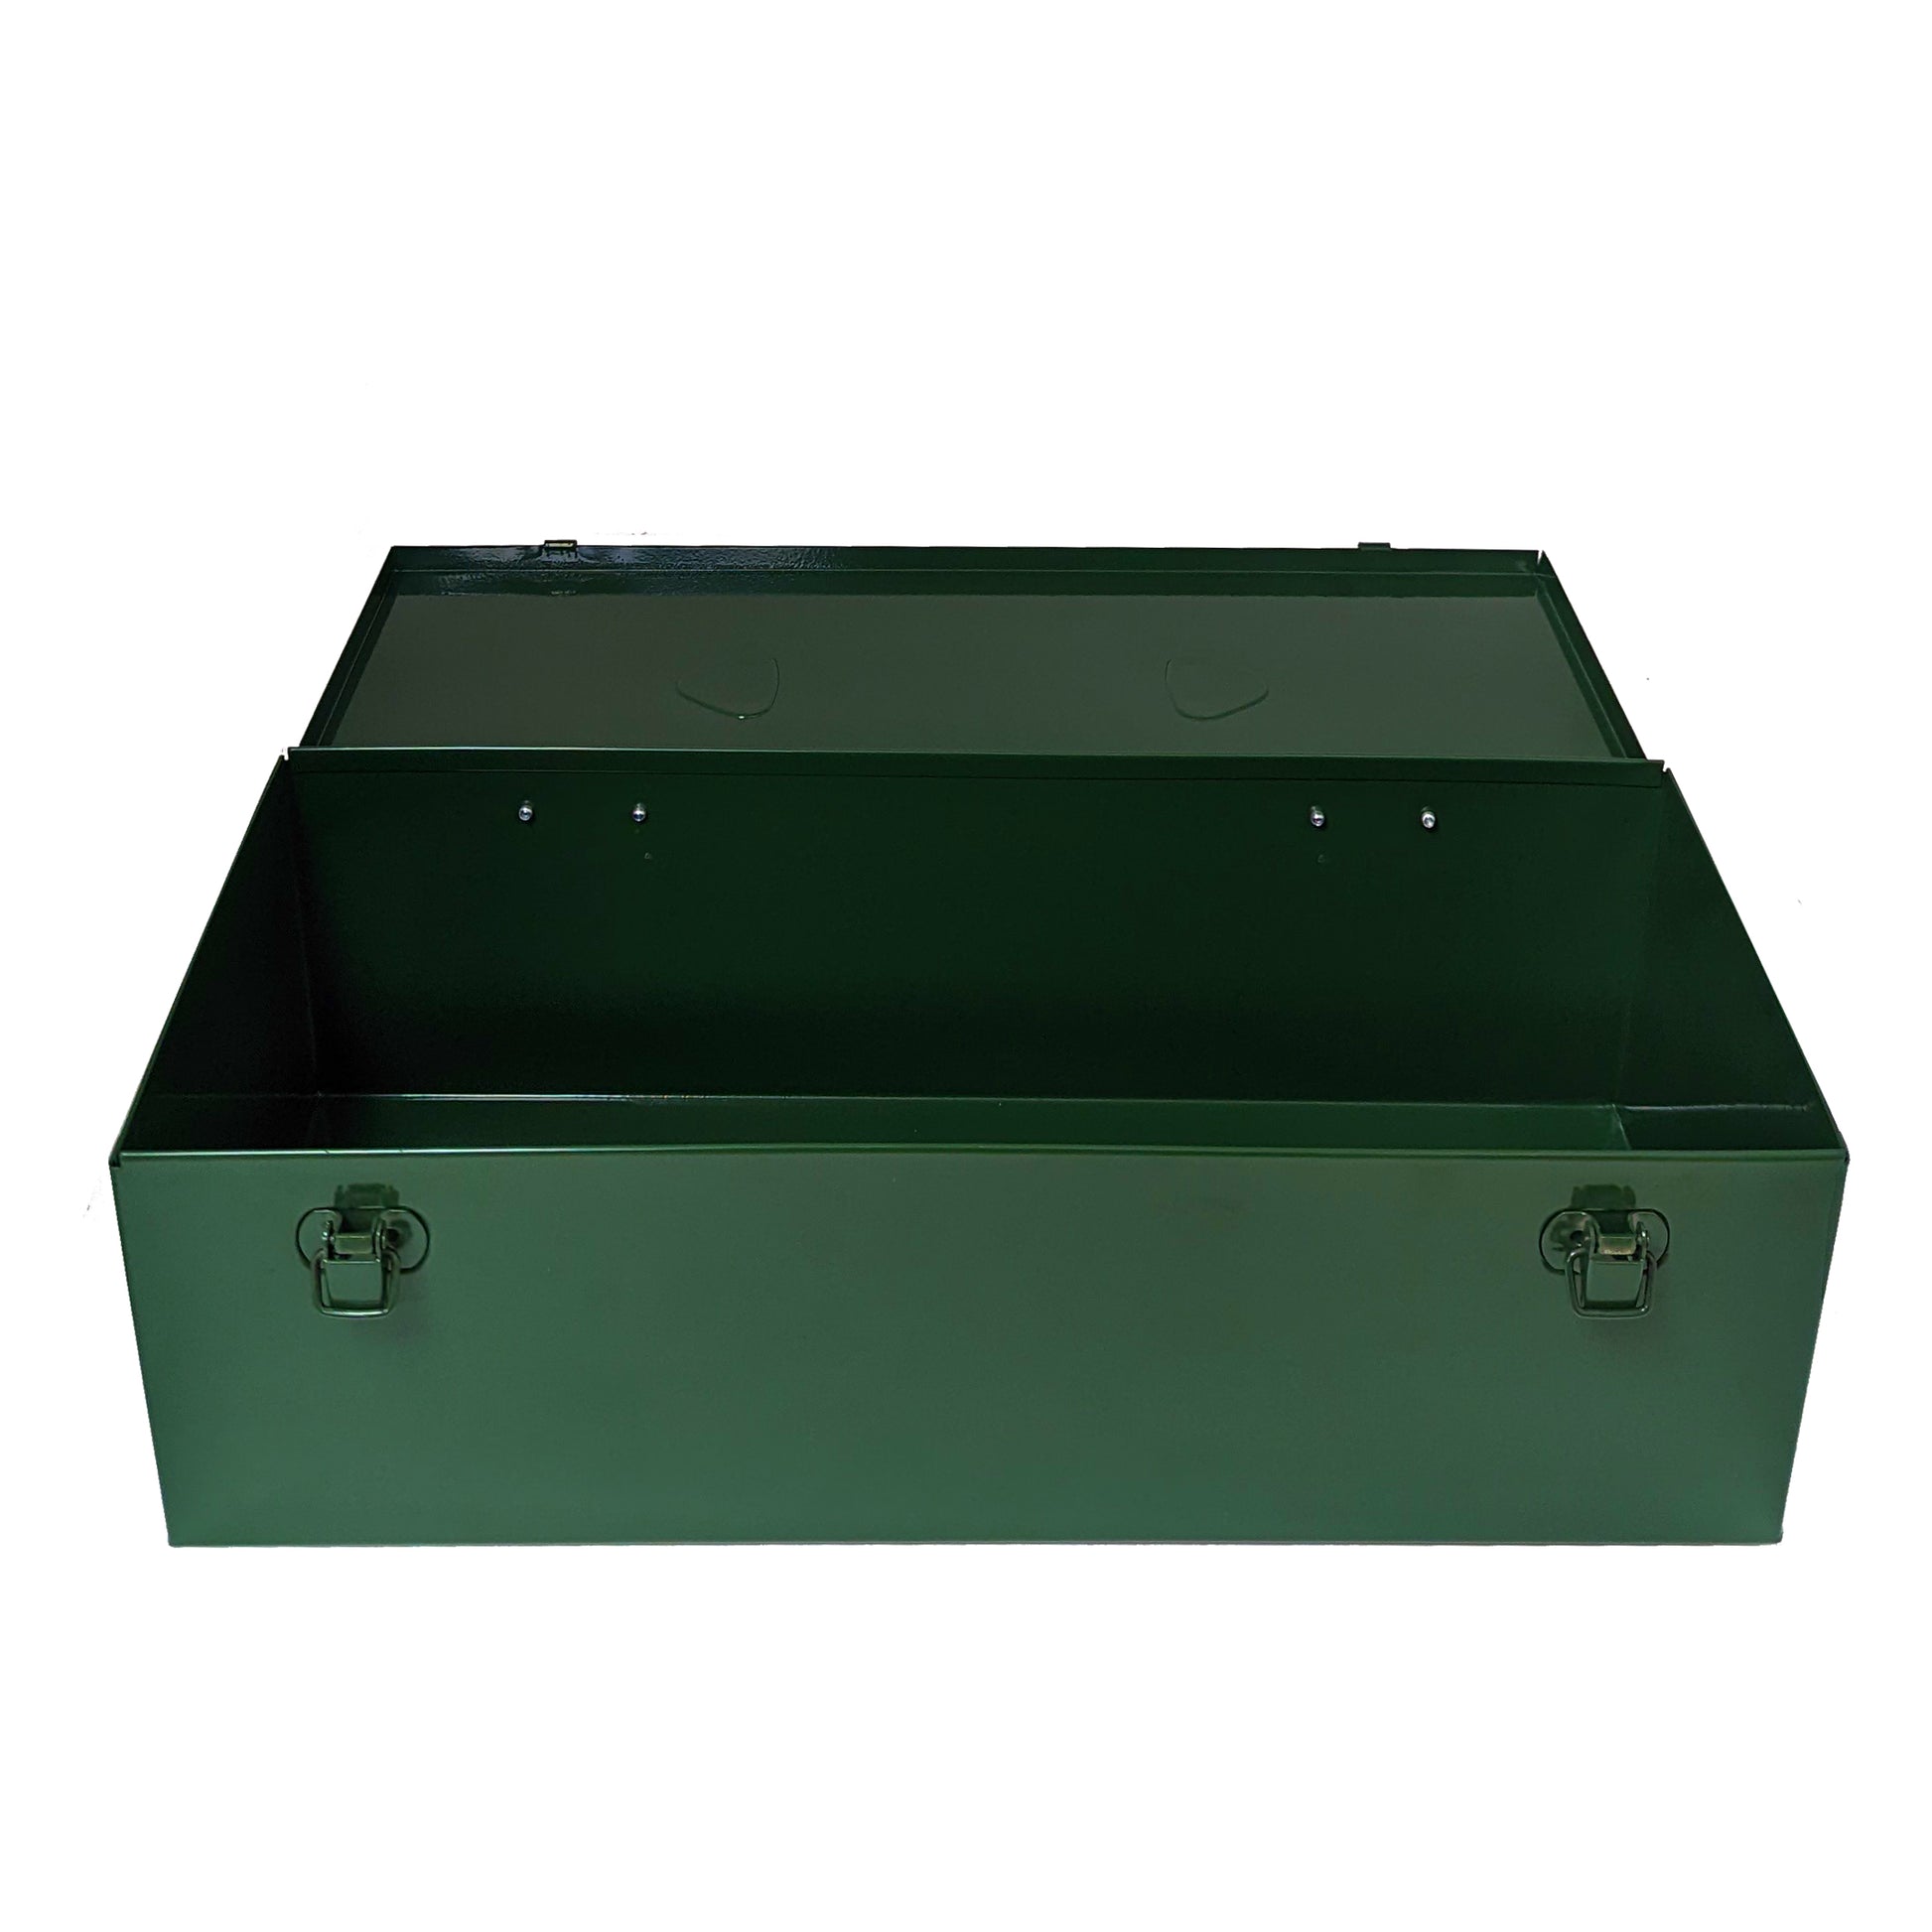 An open British racing green hobby and tool box with a spacious interior and double toggle latches on the front of the box, displayed against a white background.